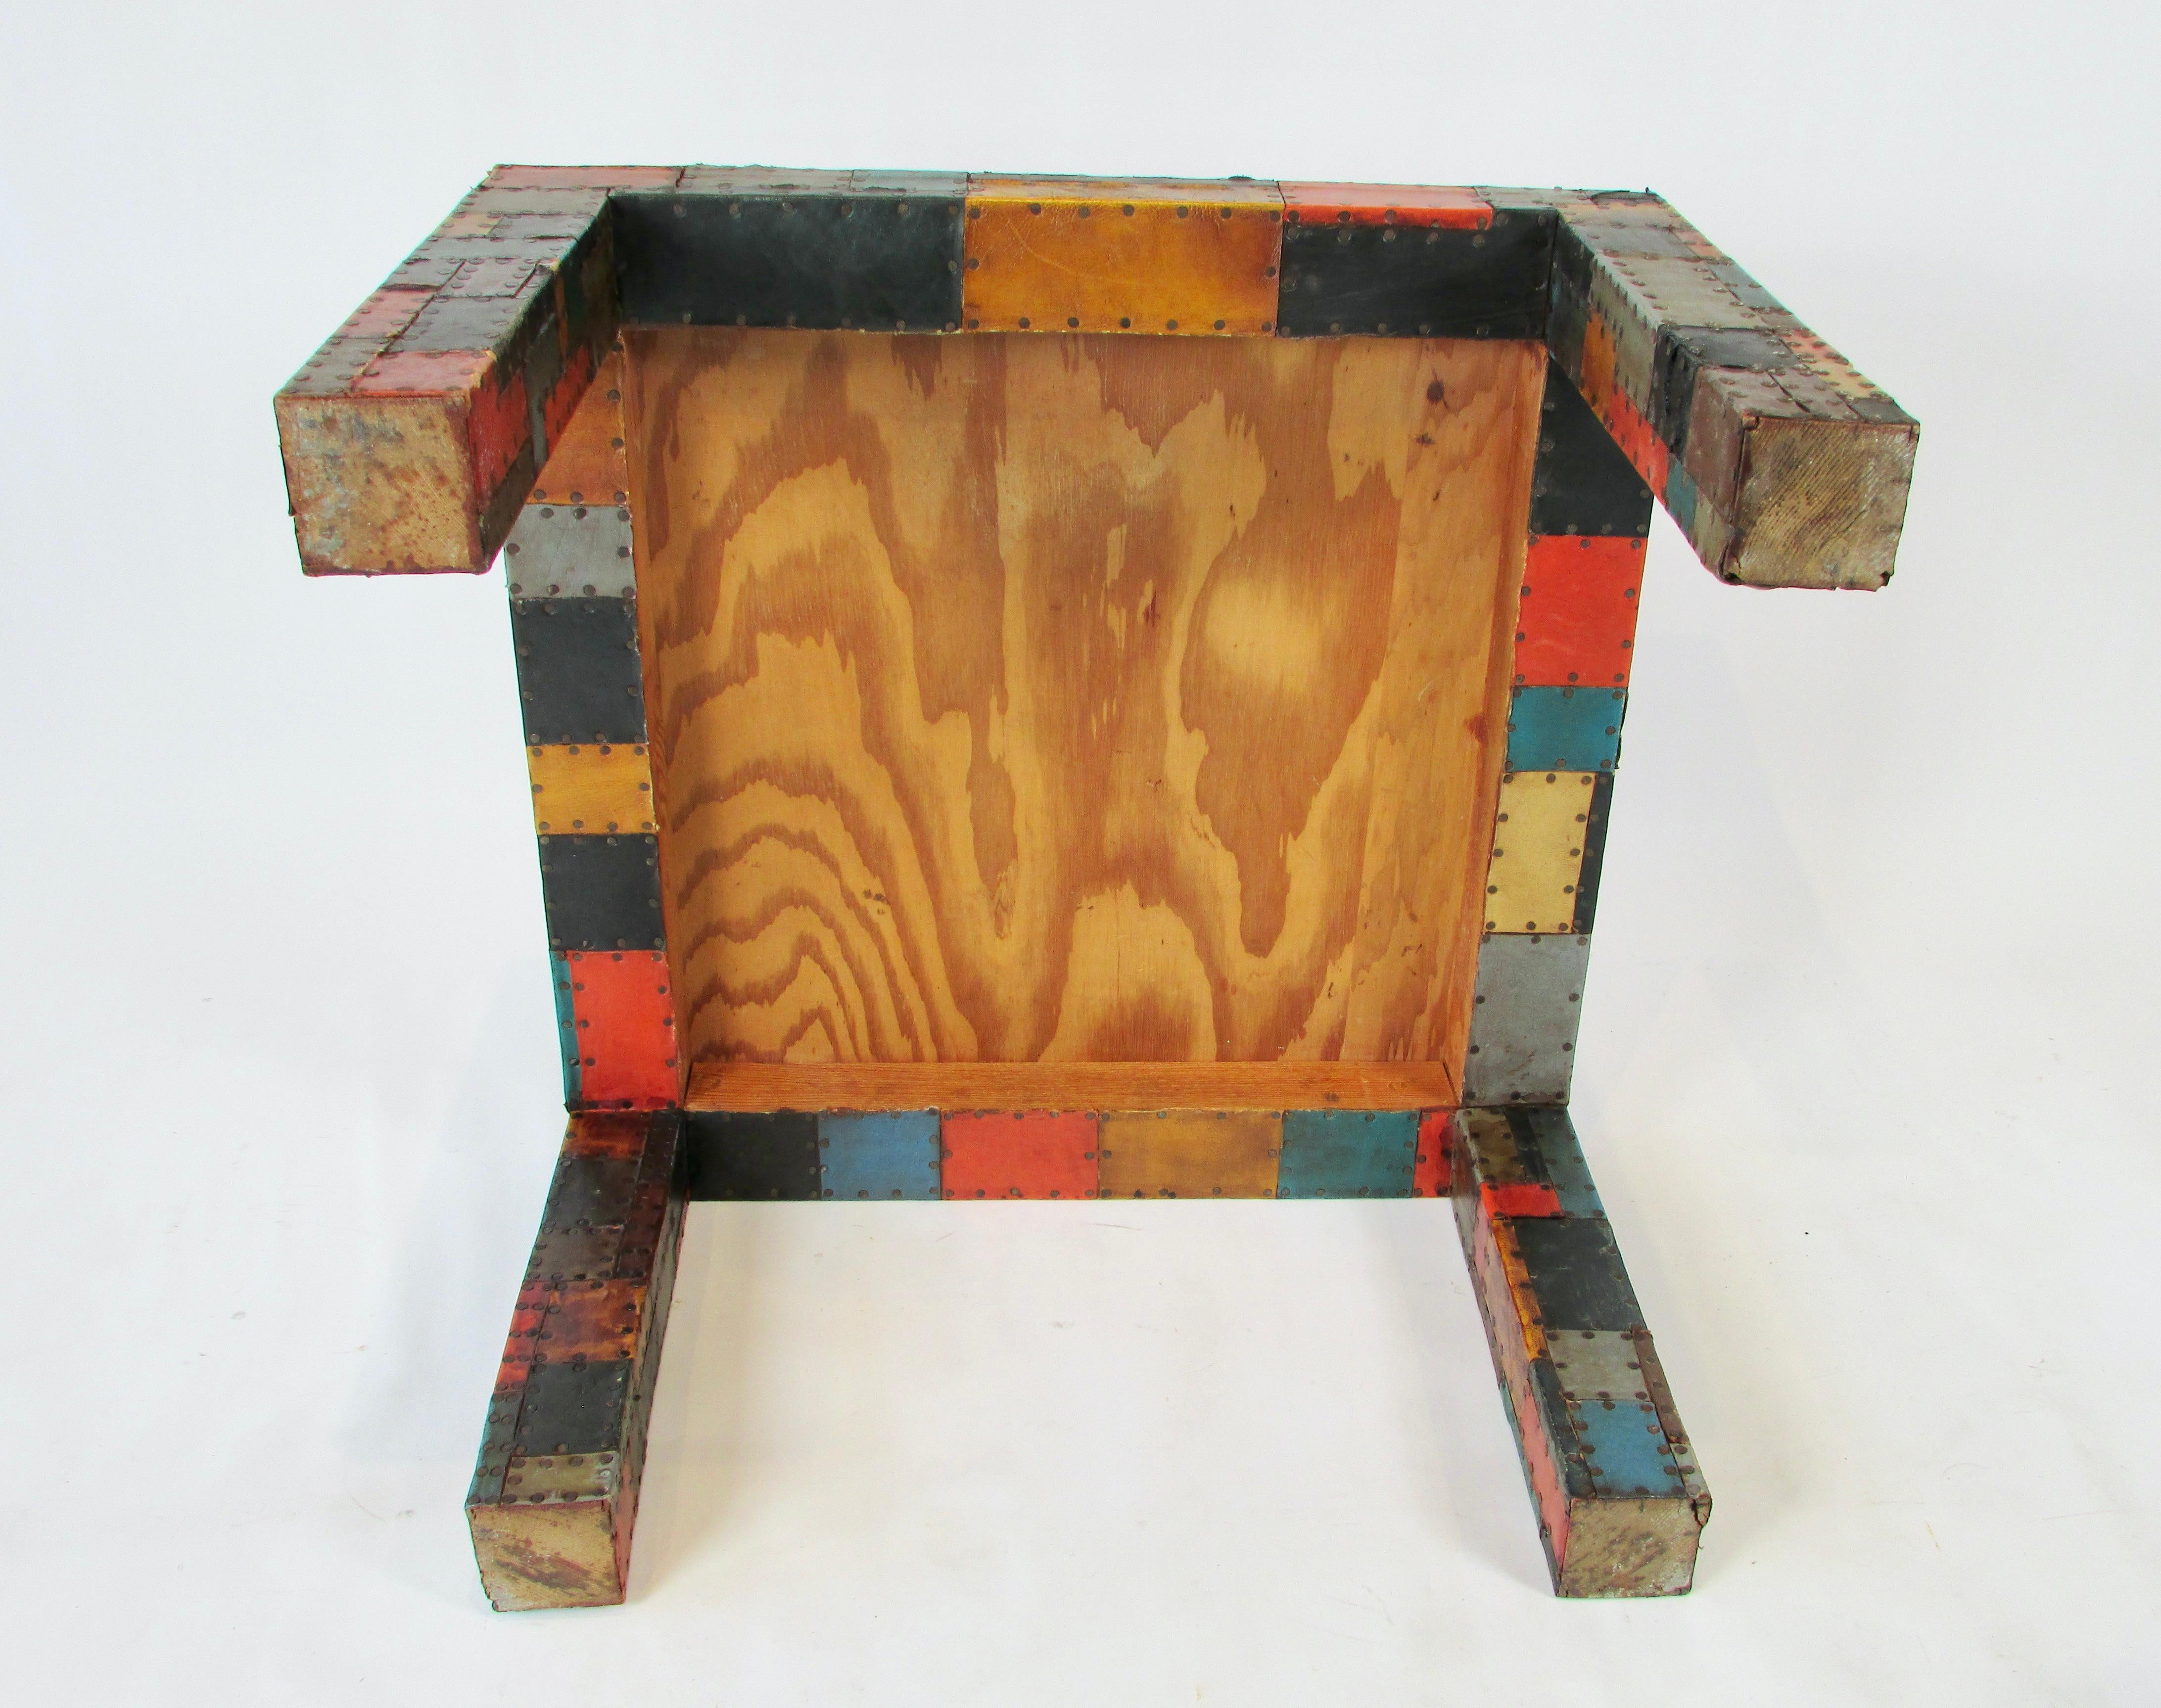 Organic 1960s Folk Art Table with Hammered Nail Multi Color Leather Patchwork For Sale 4